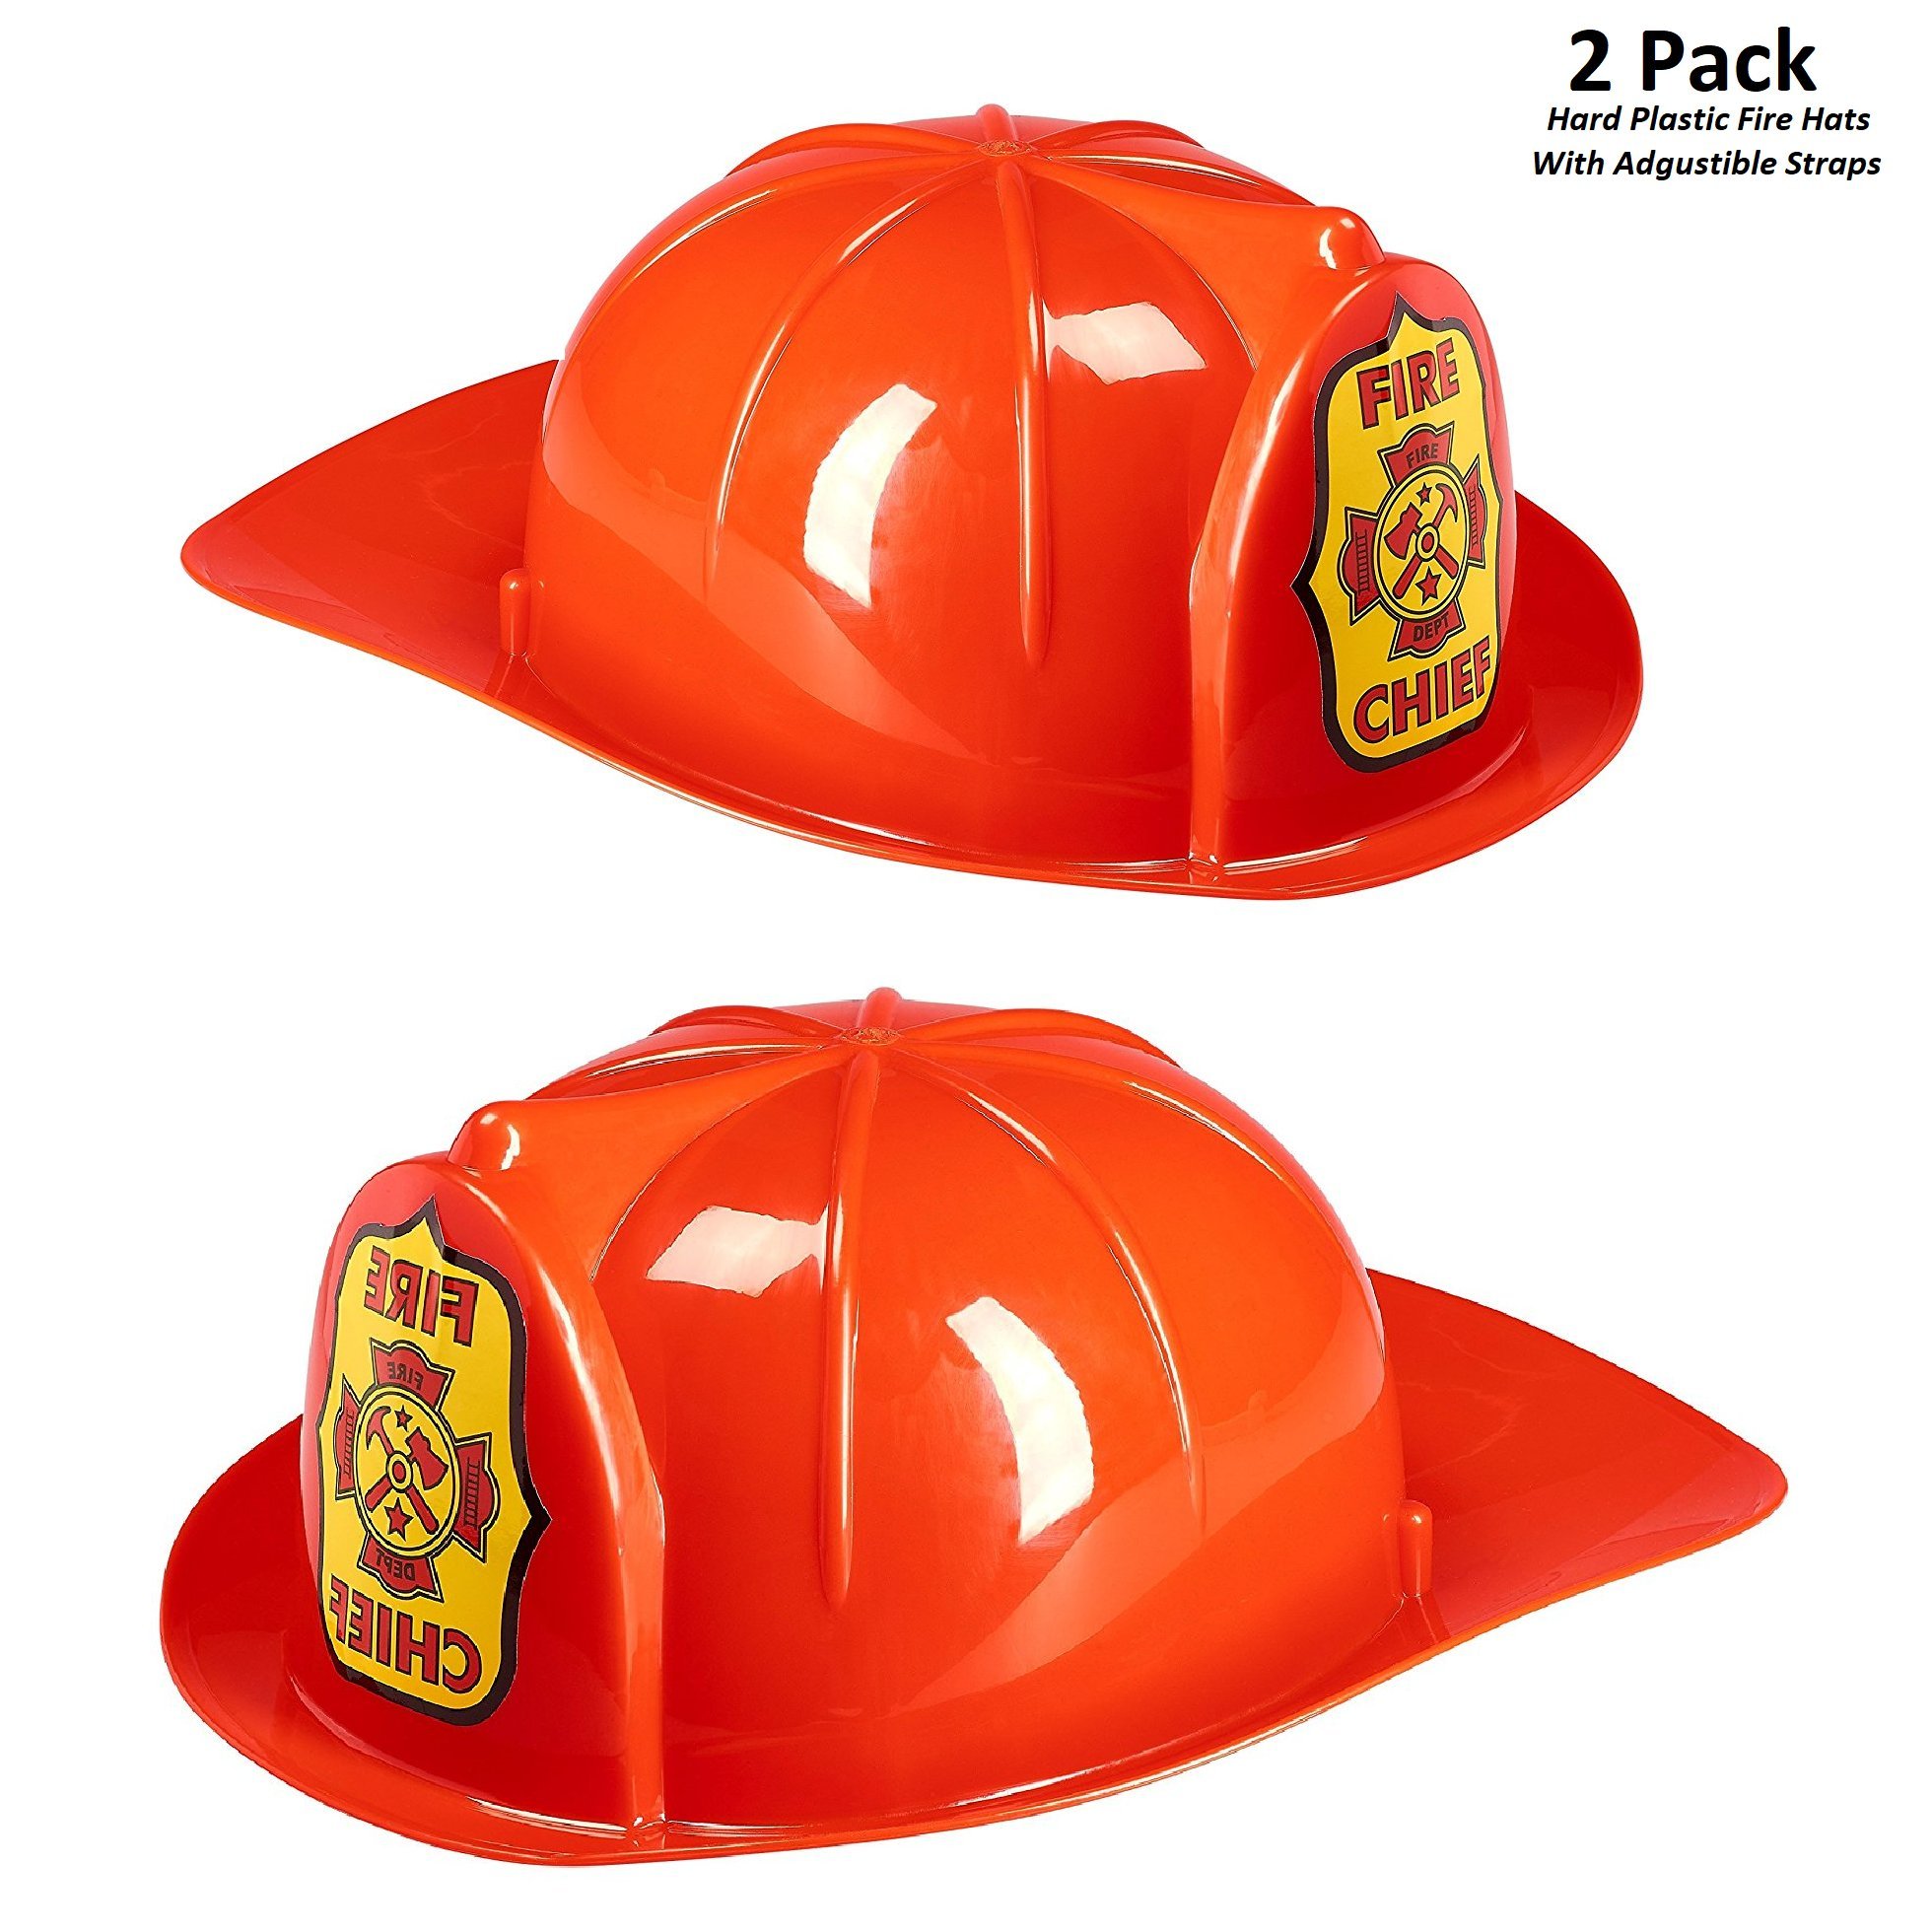 Cheap Toy Fireman Hat, find Toy Fireman Hat deals on line at Alibaba.com